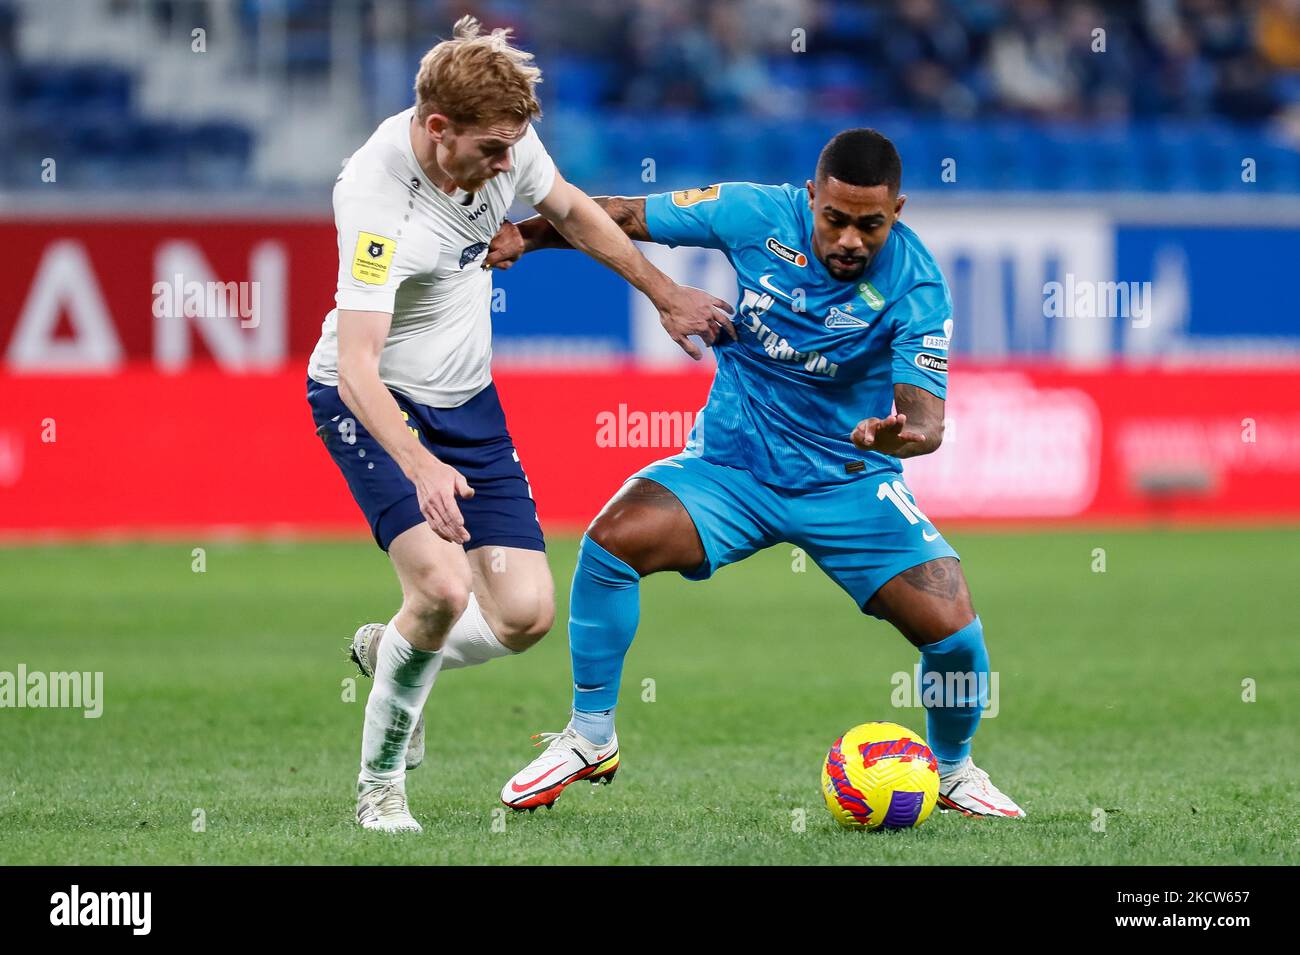 Malcom (R) of Zenit St. Petersburg and Pavel Mogilevets of Nizhny Novgorod vie for the ball during the Russian Premier League match between FC Zenit Saint Petersburg and FC Nizhny Novgorod on November 19, 2021 at Gazprom Arena in Saint Petersburg, Russia. (Photo by Mike Kireev/NurPhoto) Stock Photo